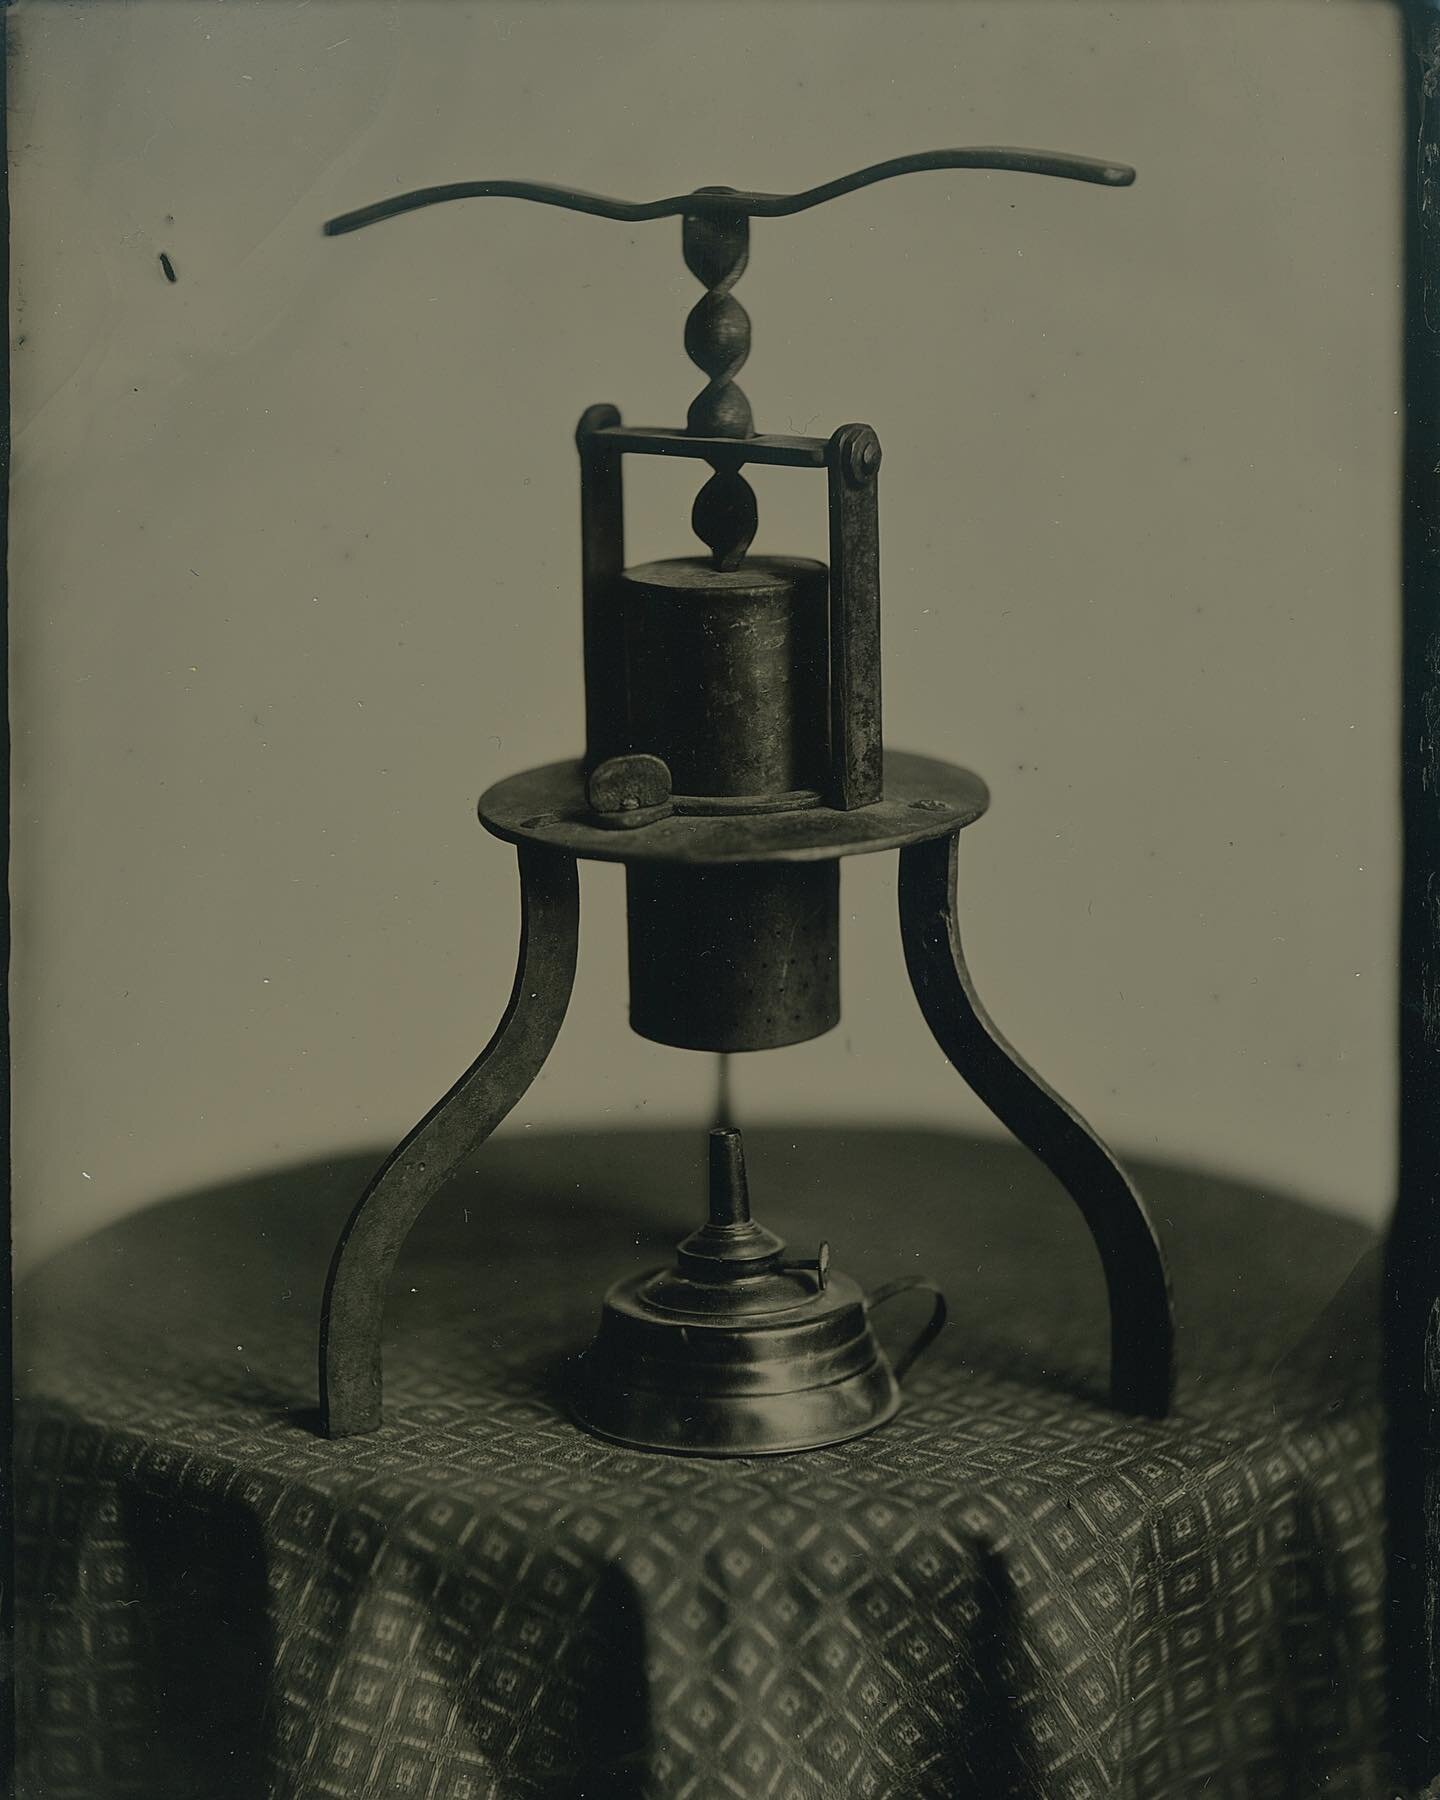 Donna and I thoroughly enjoyed the wet plate collodion workshop we took this past summer. A good portion of it was spent discussing lighting based on surfaces and textures. 

1 Meat juicer with an alcohol burner
2 Still-life with different textures
3